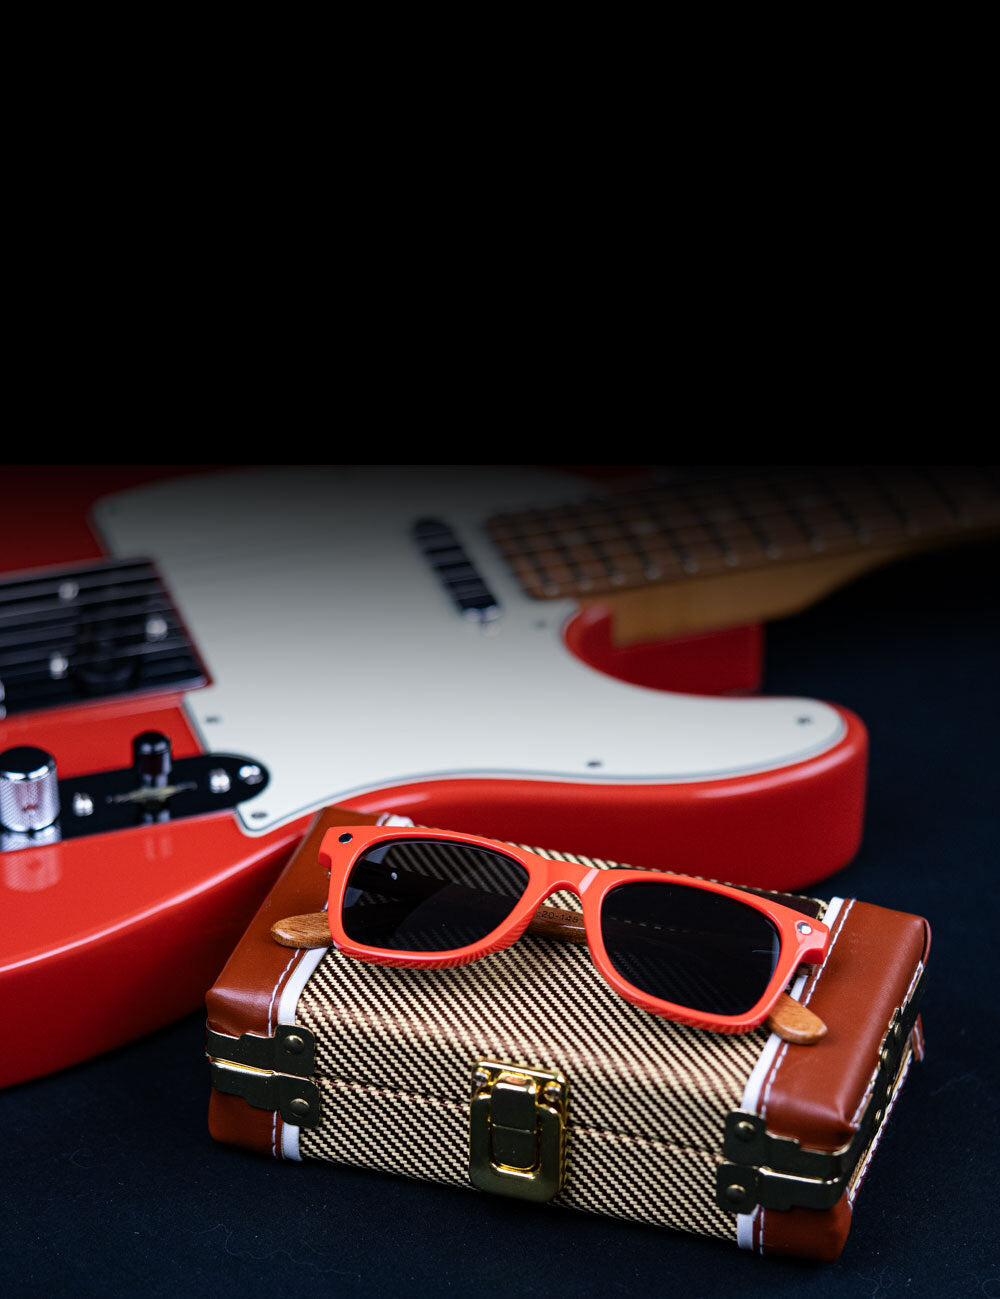 Fender sunglasses on a fender case next to a guitar